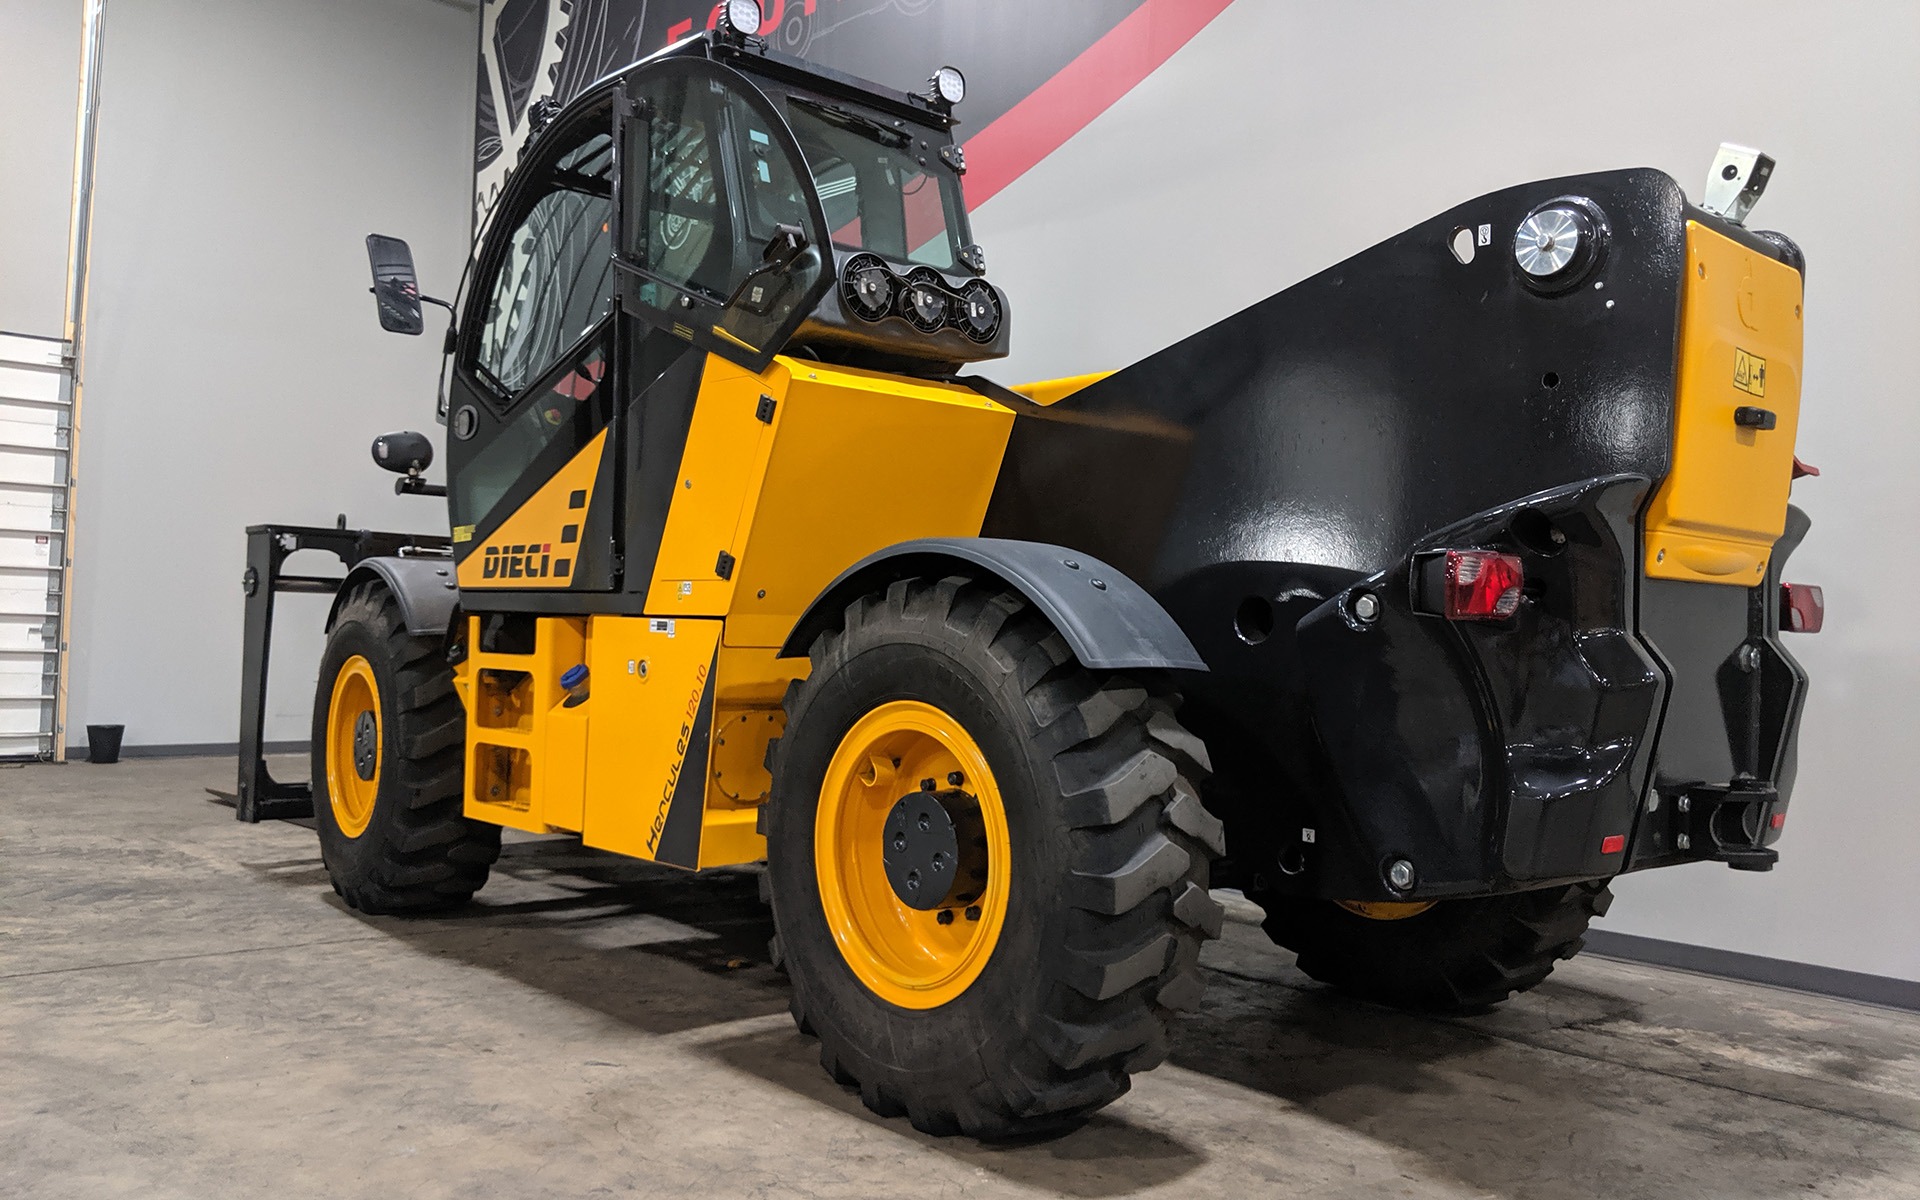 Used 2019 DIECI 120.10  | Cary, IL